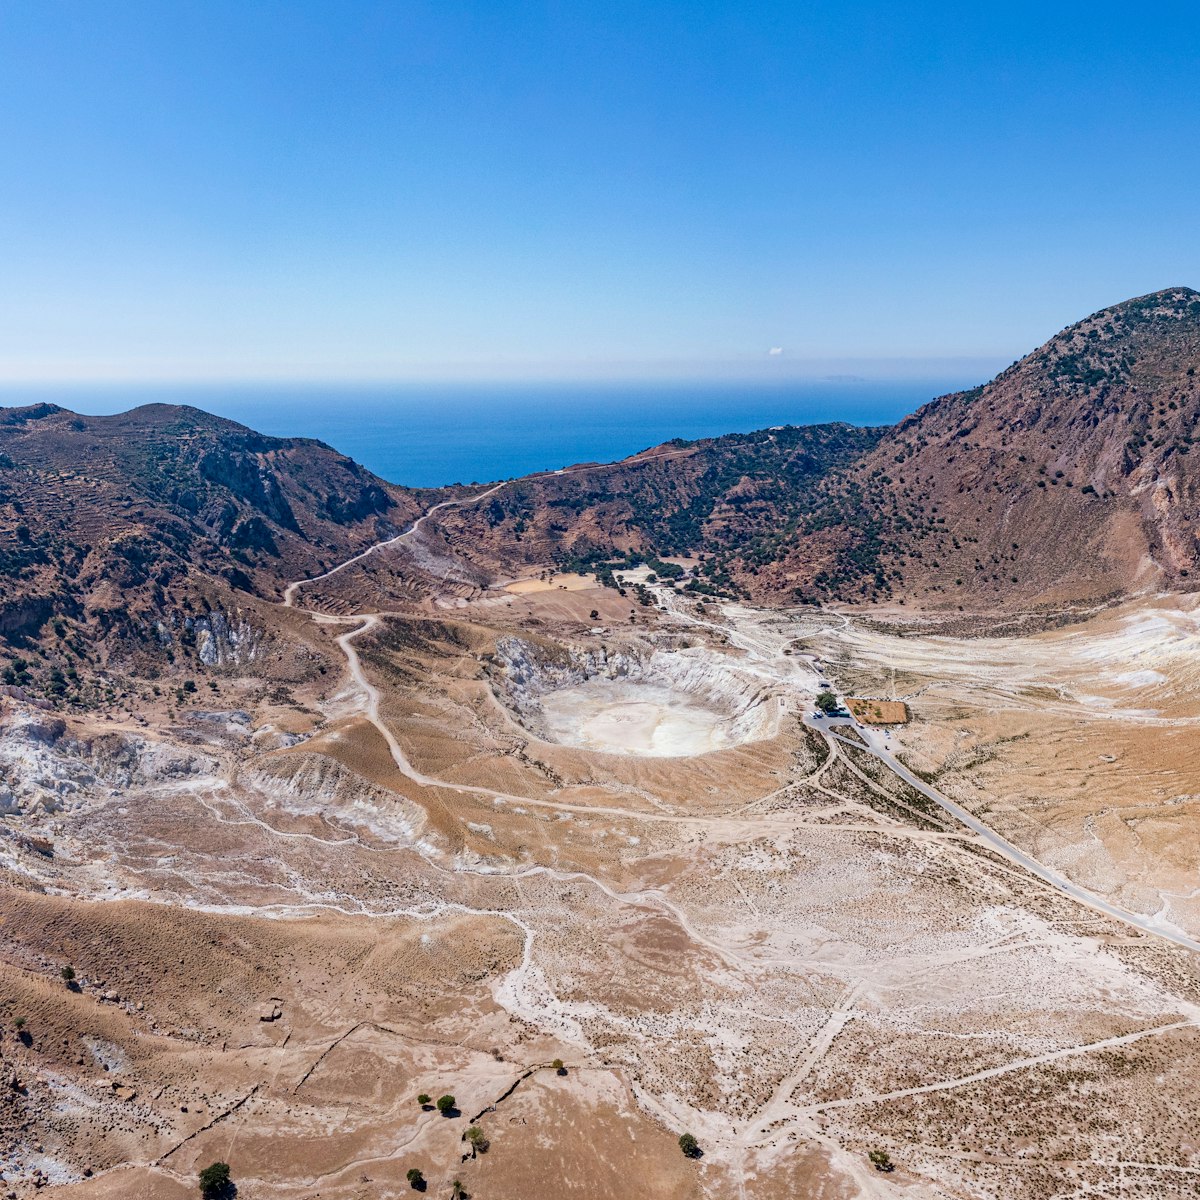 Aerial of the Stefanos volcano crater on Nisyros Island, with the Aegean sea in the background.
1513319564
aegean, aerial, cliff, crater, dodecanese, drone, greece, island, landscape, mountain, nature, nisyros, photo, rock, rocky, sea, stefanos, volcano